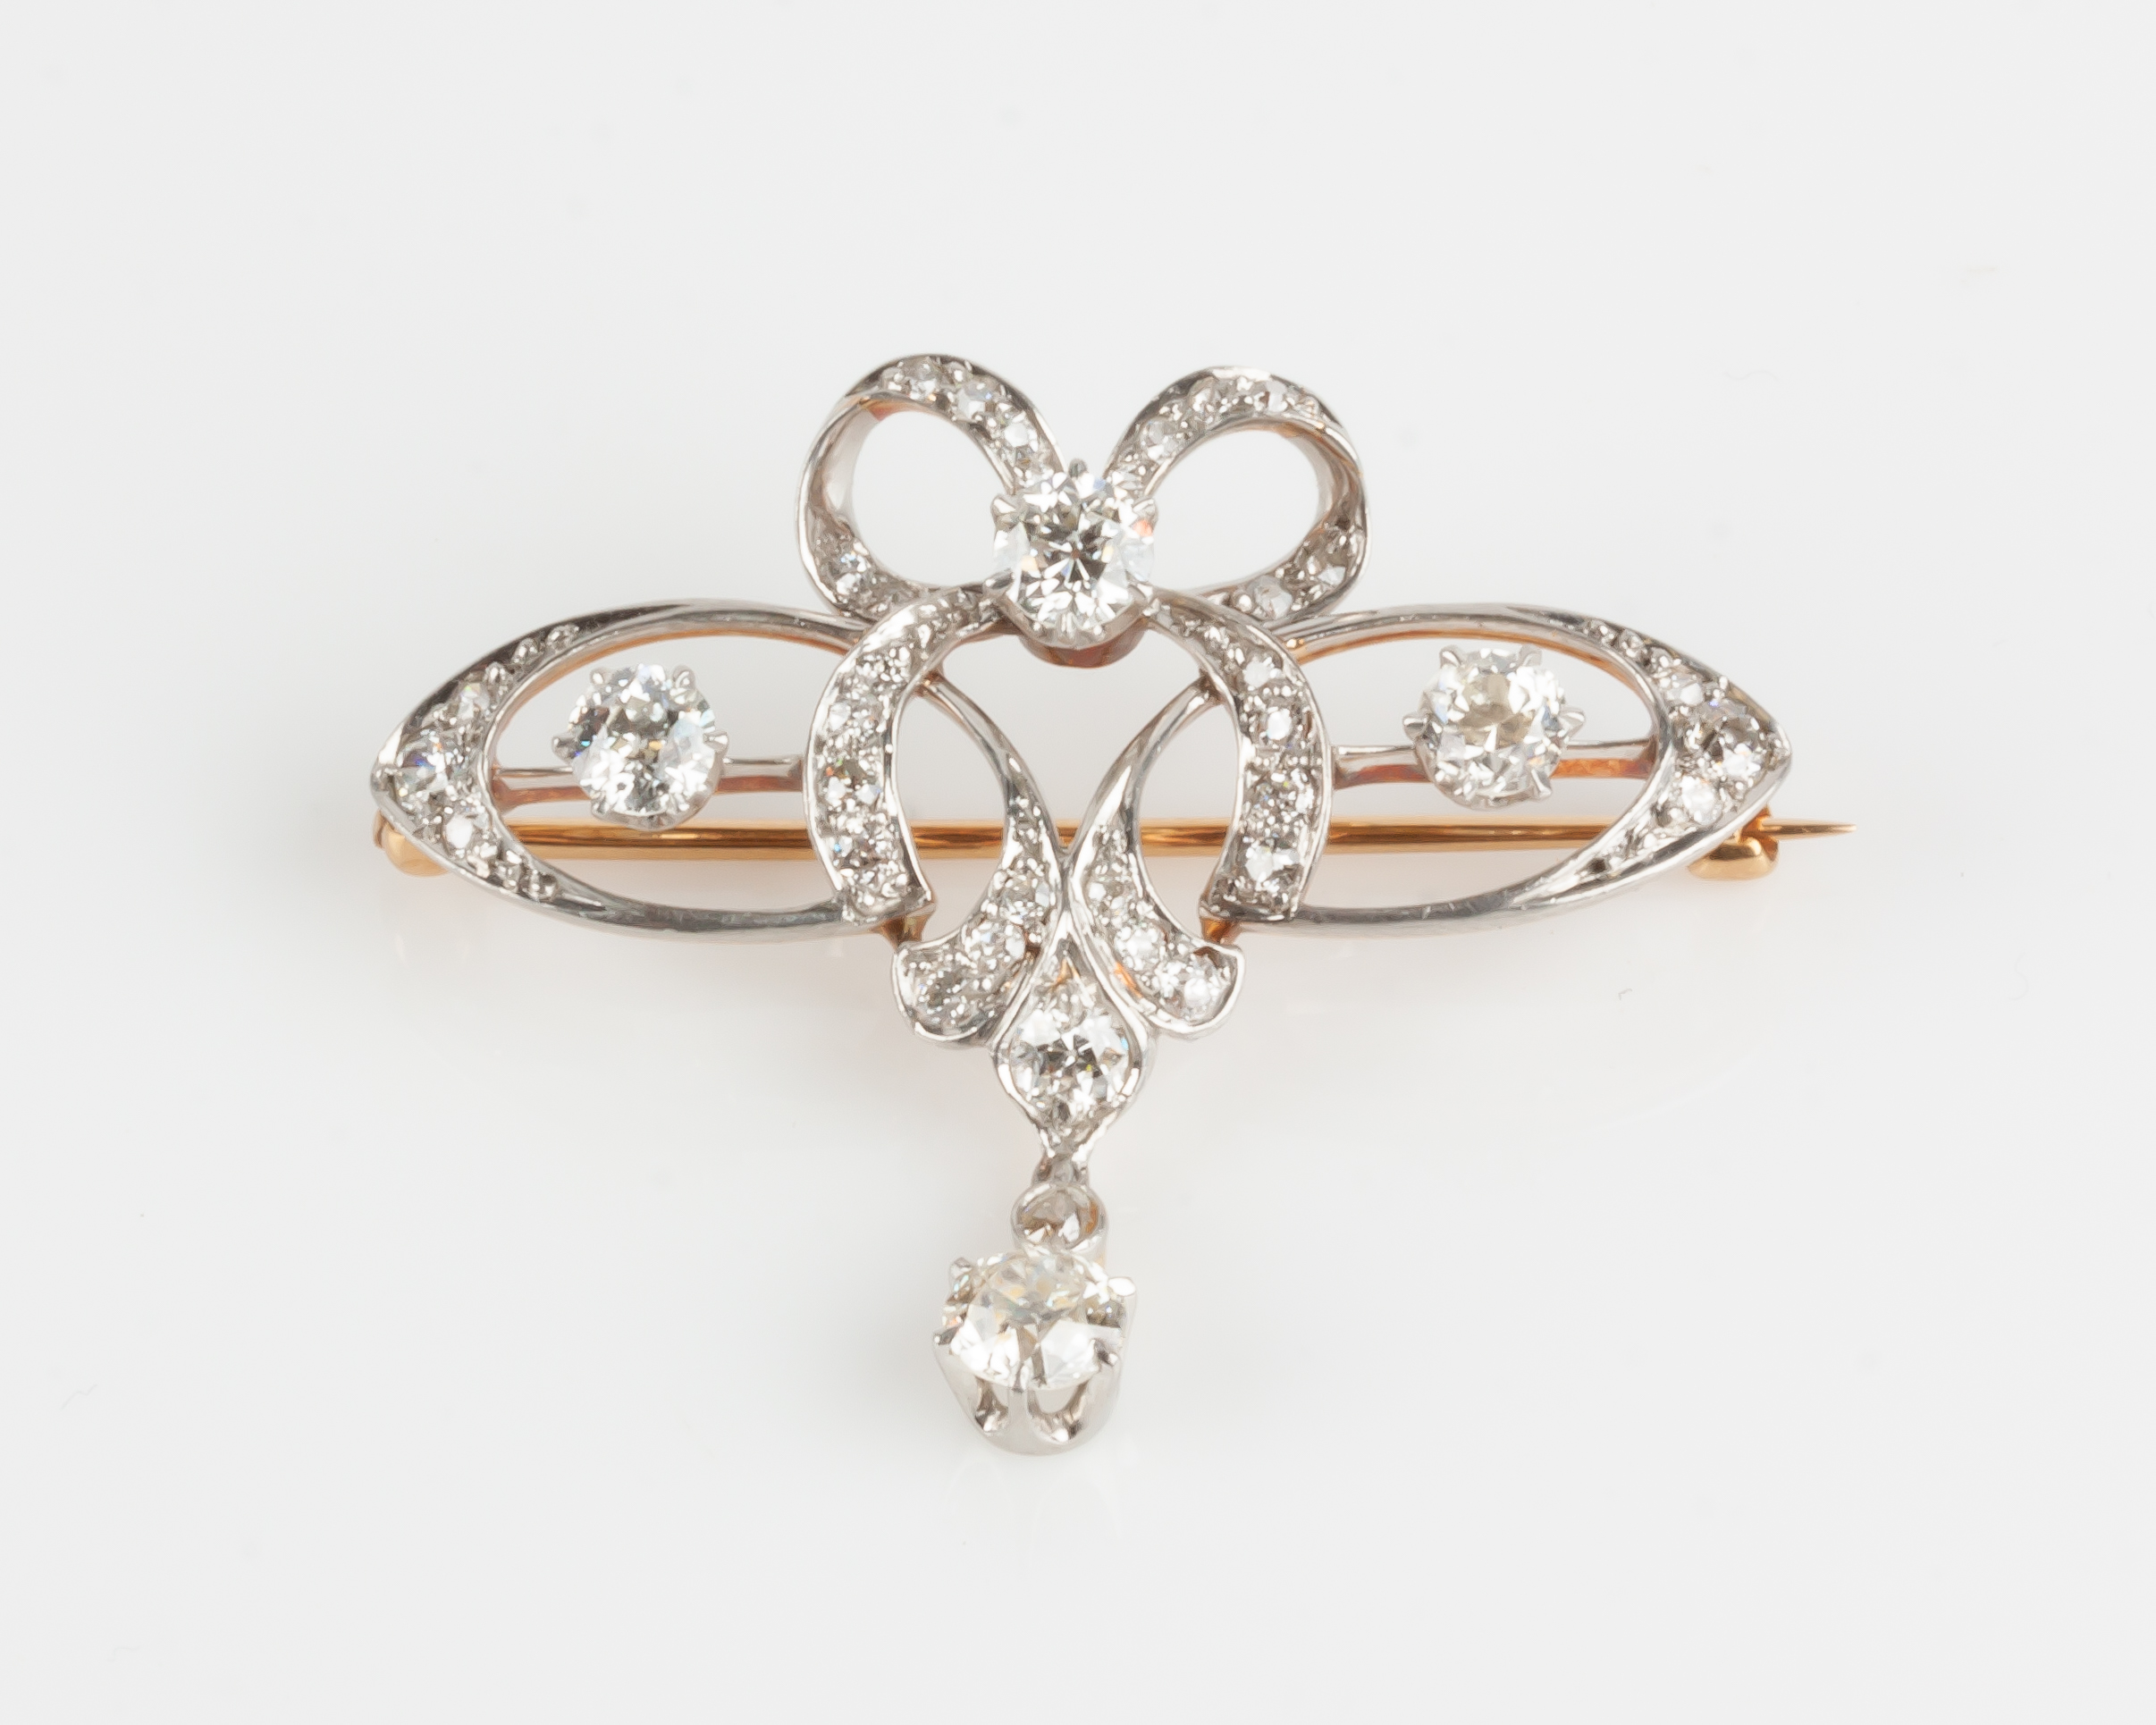 ATTRIBUTED TO TIFFANY & CO. BELLE